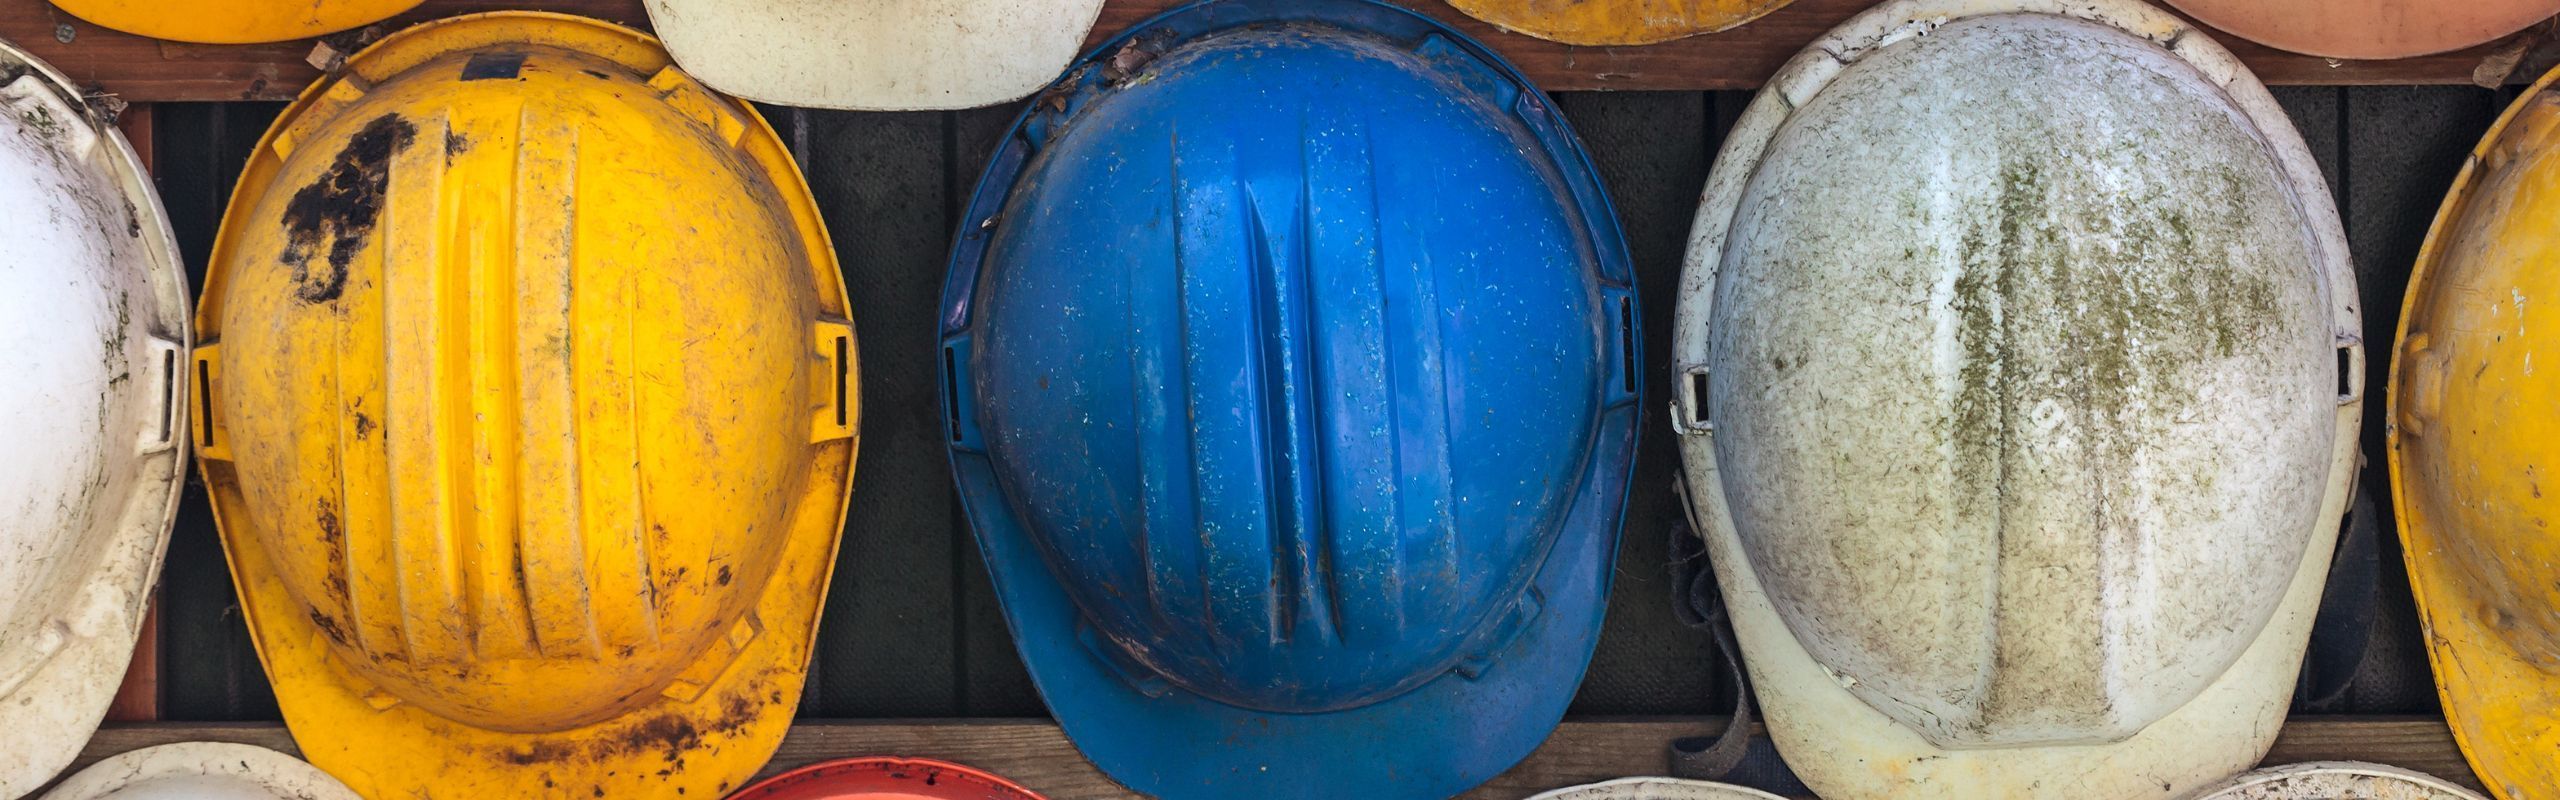 Image of construction worker hardhats